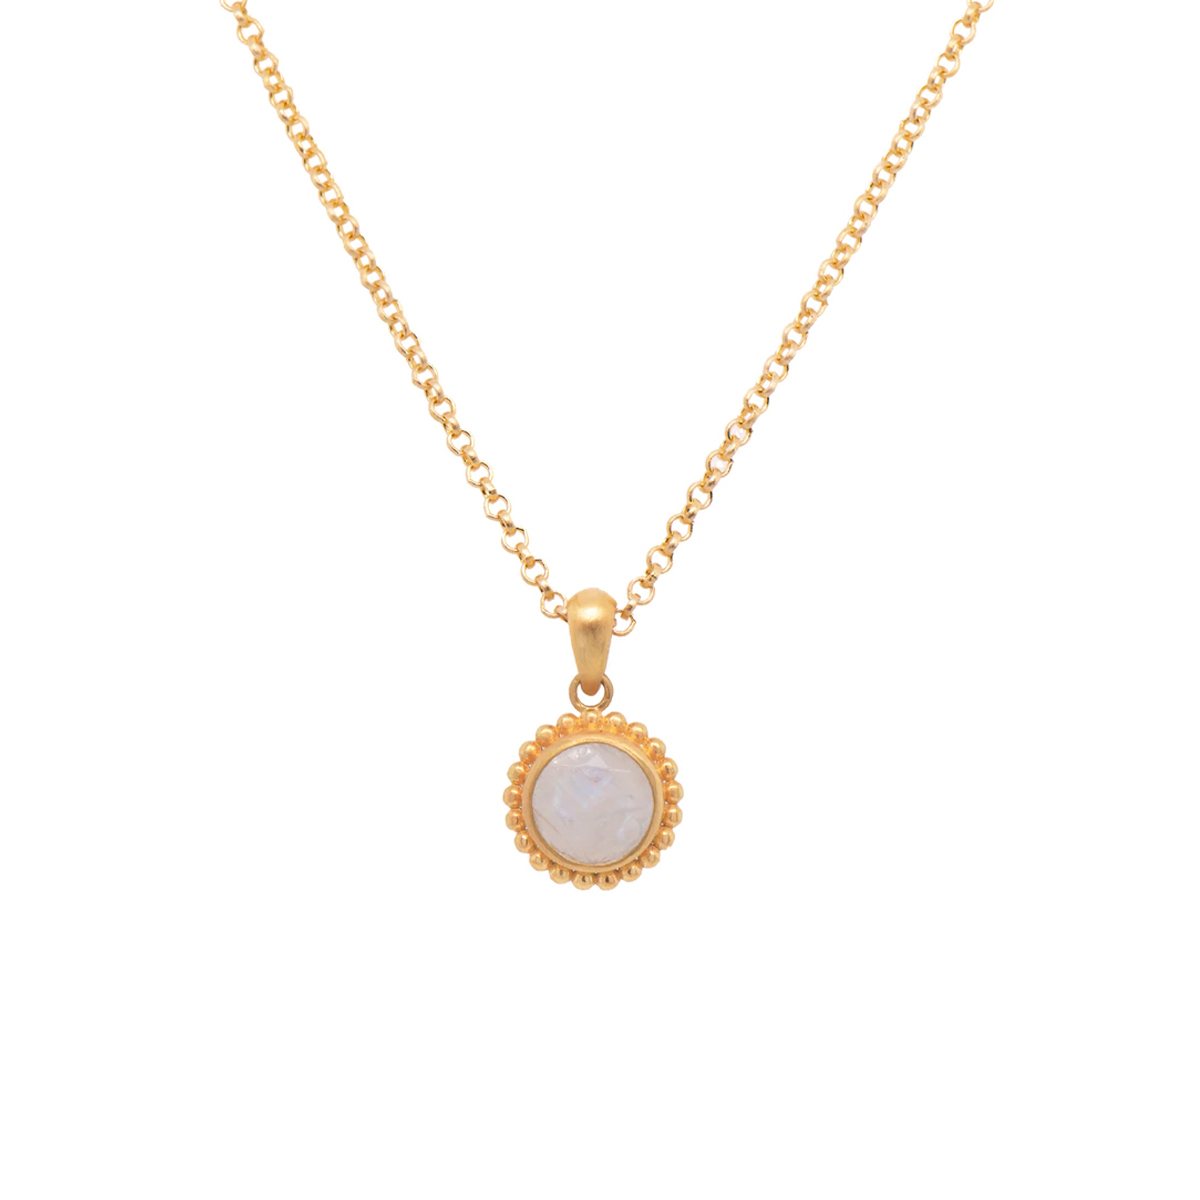 24K Gold Plated Sterling Silver Rainbow Moonstone Pendant with Chain